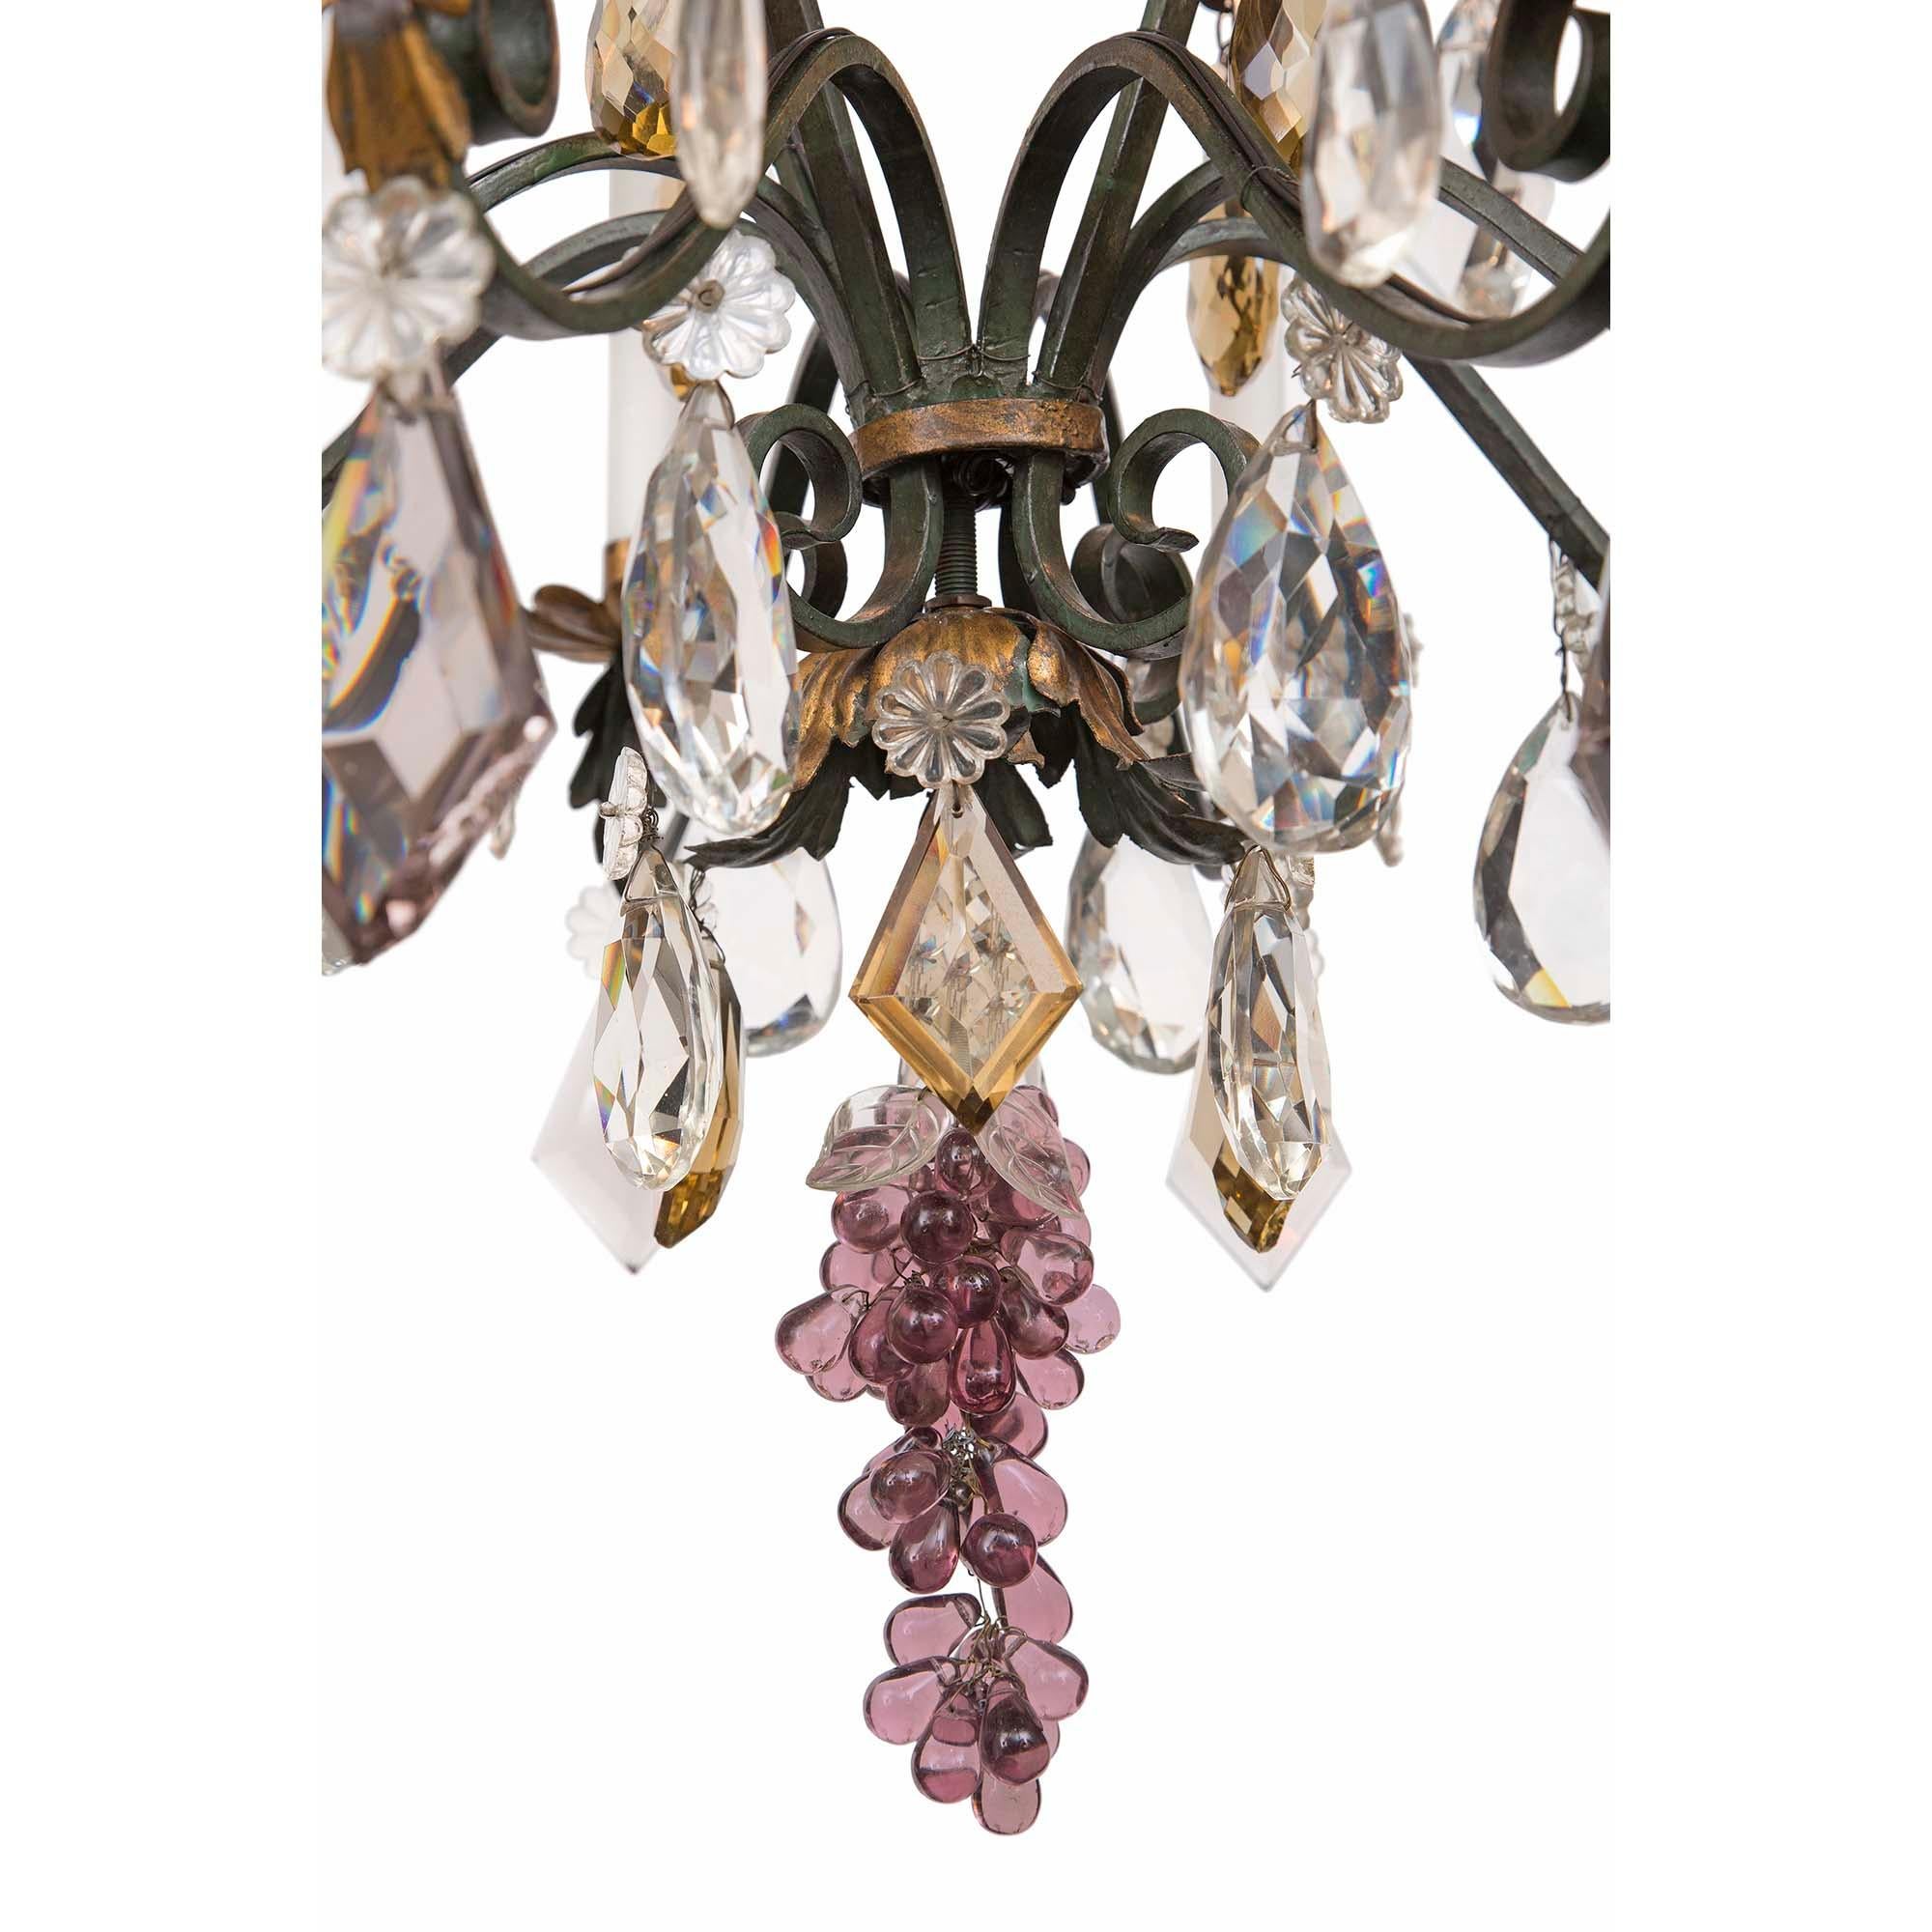 French 19th Century Wrought Iron, Gilt Metal And Baccarat Crystal Chandelier For Sale 1